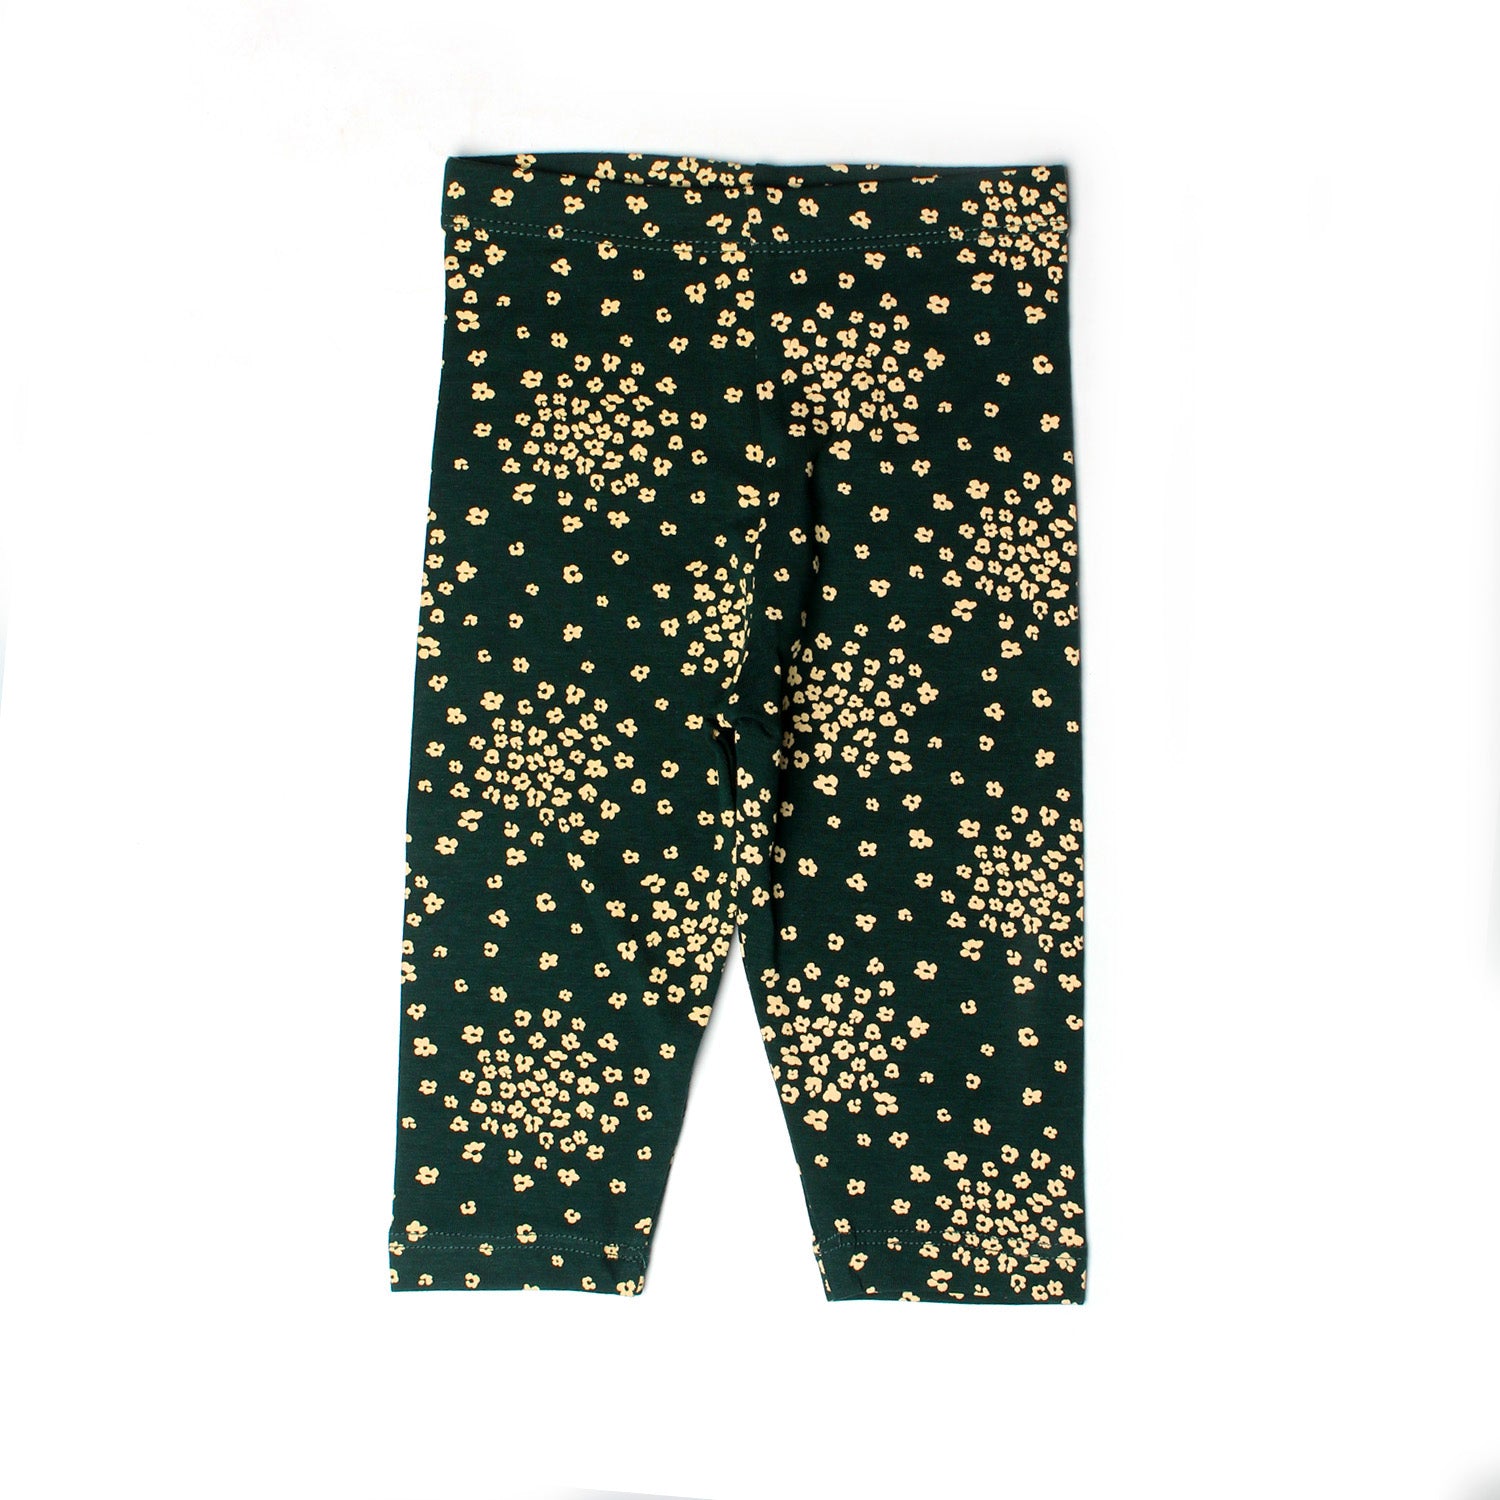 GREEN FLOWER PRINTED TIGHTS FOR GIRLS